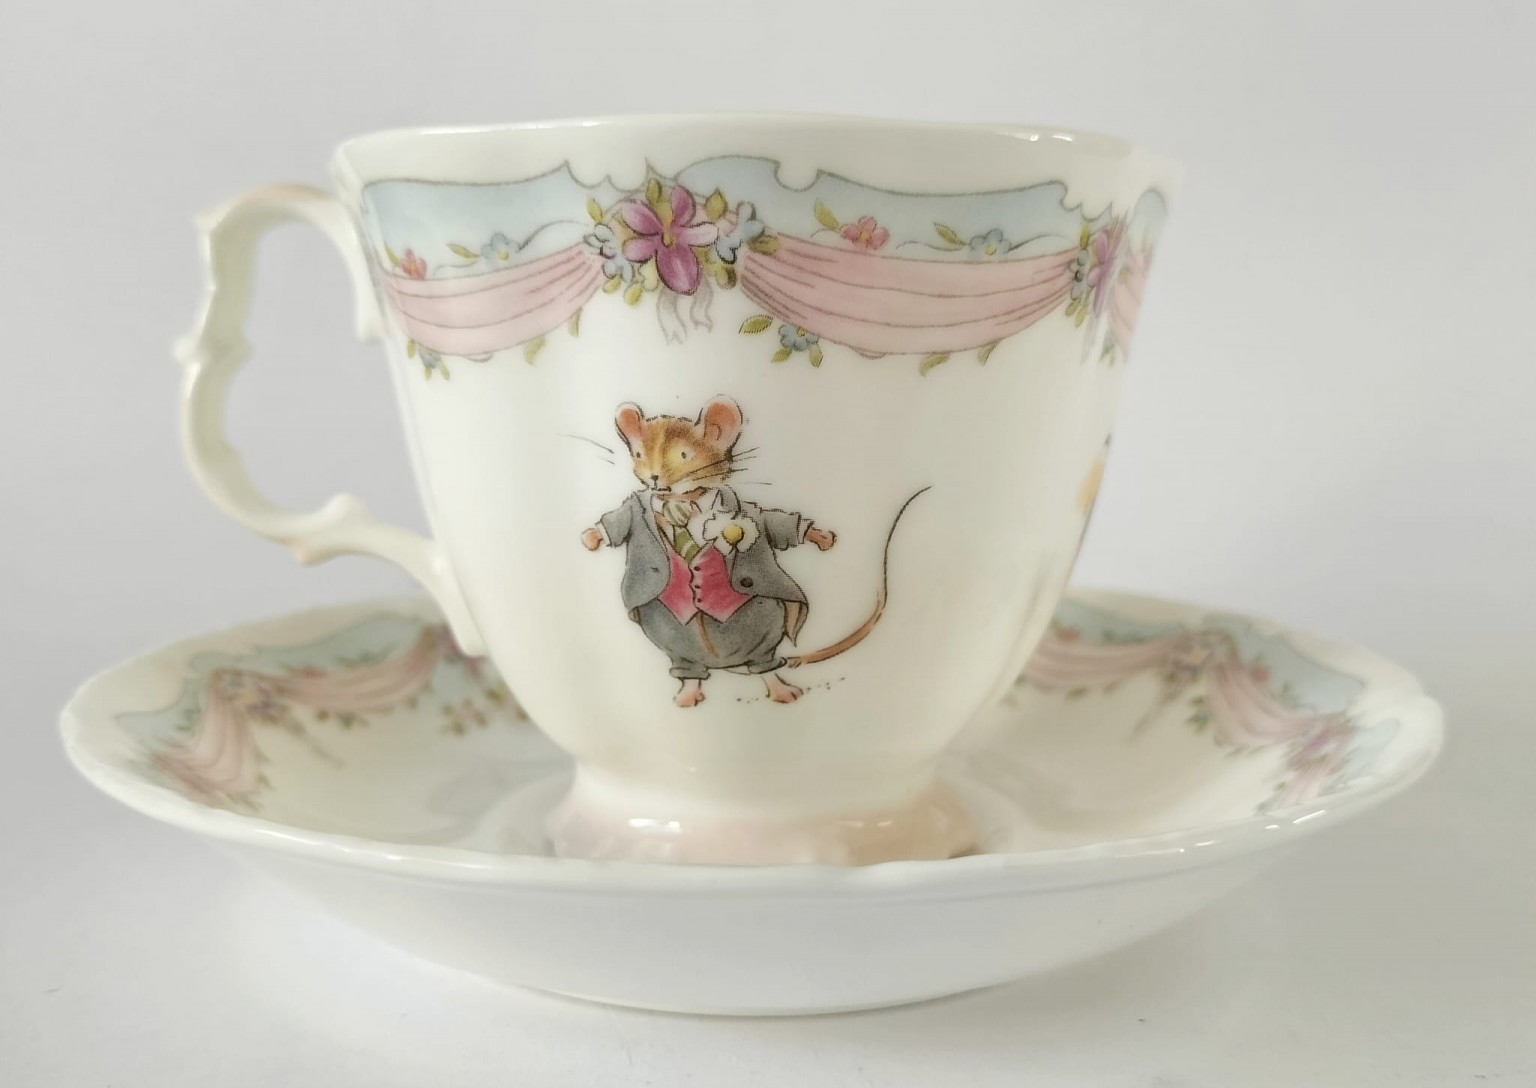 Find more $20 The Wedding Tea Cup And Saucer - Brambly Hedge Royal Doulton  - 1987 - Gift Collection for sale at up to 90% off